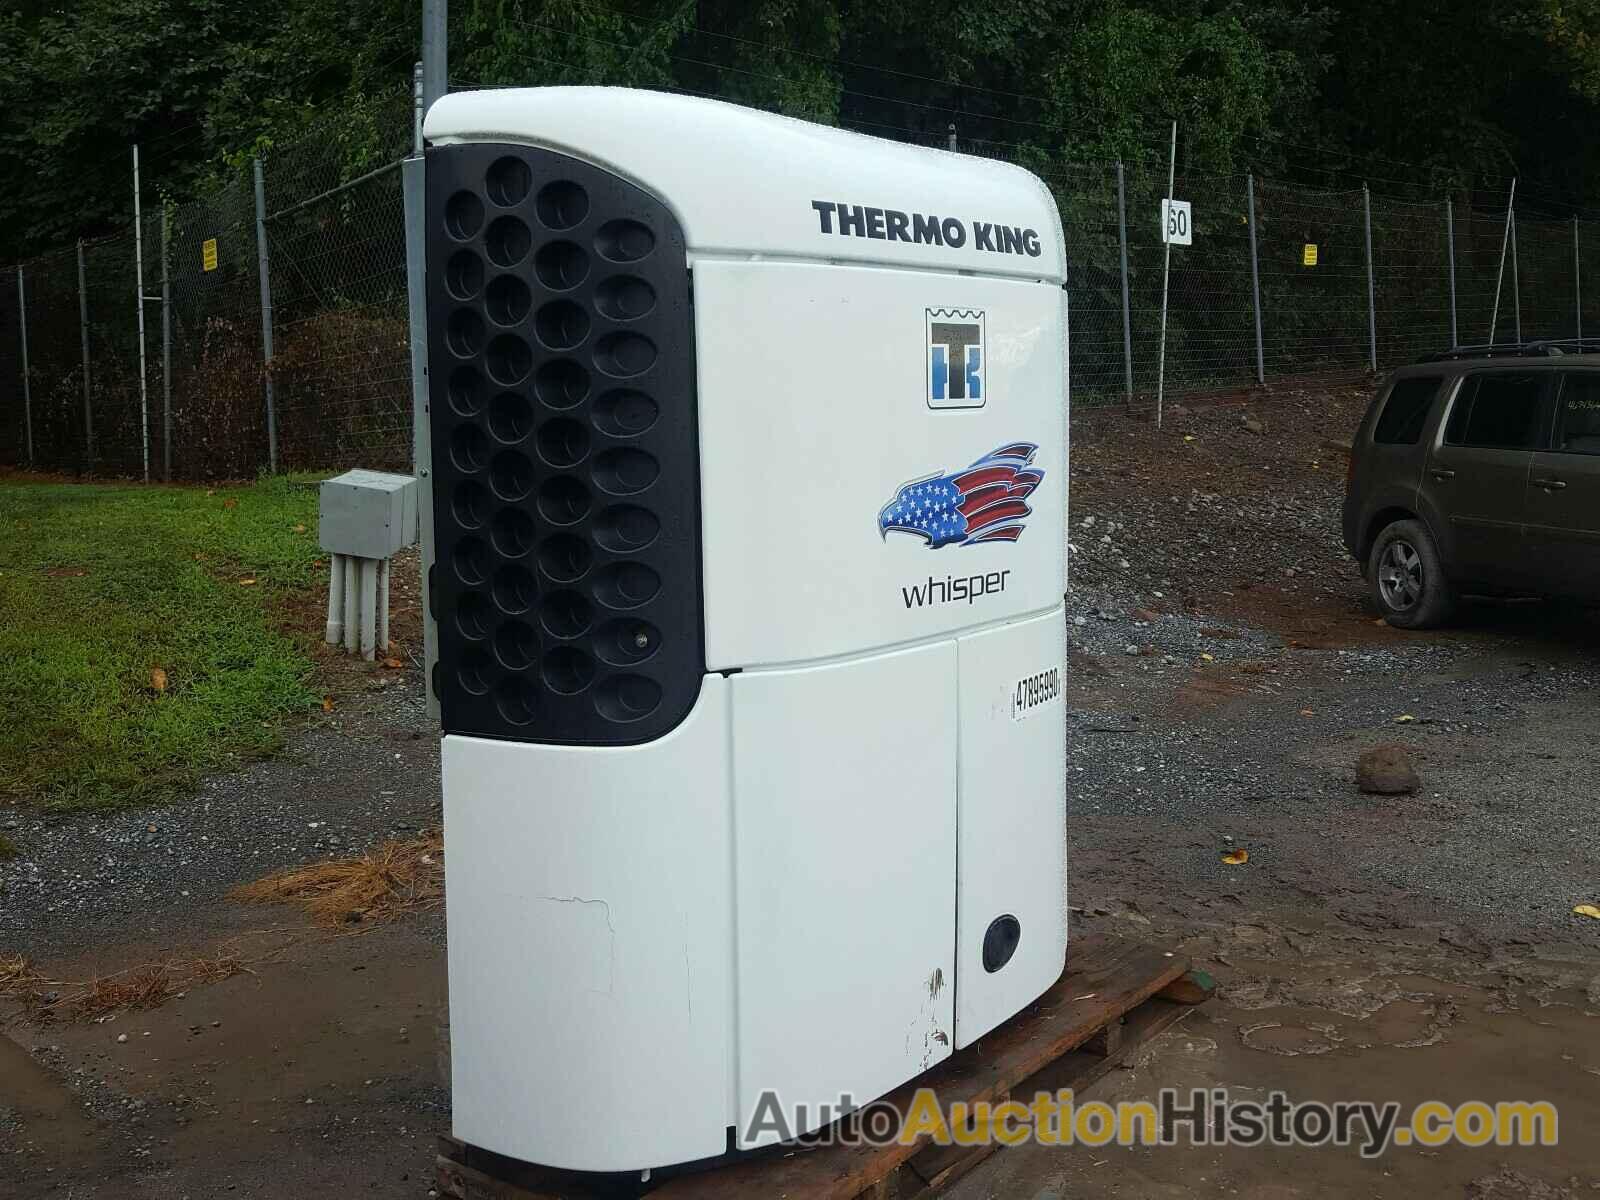 2013 THER THERMOKING, 6001135967